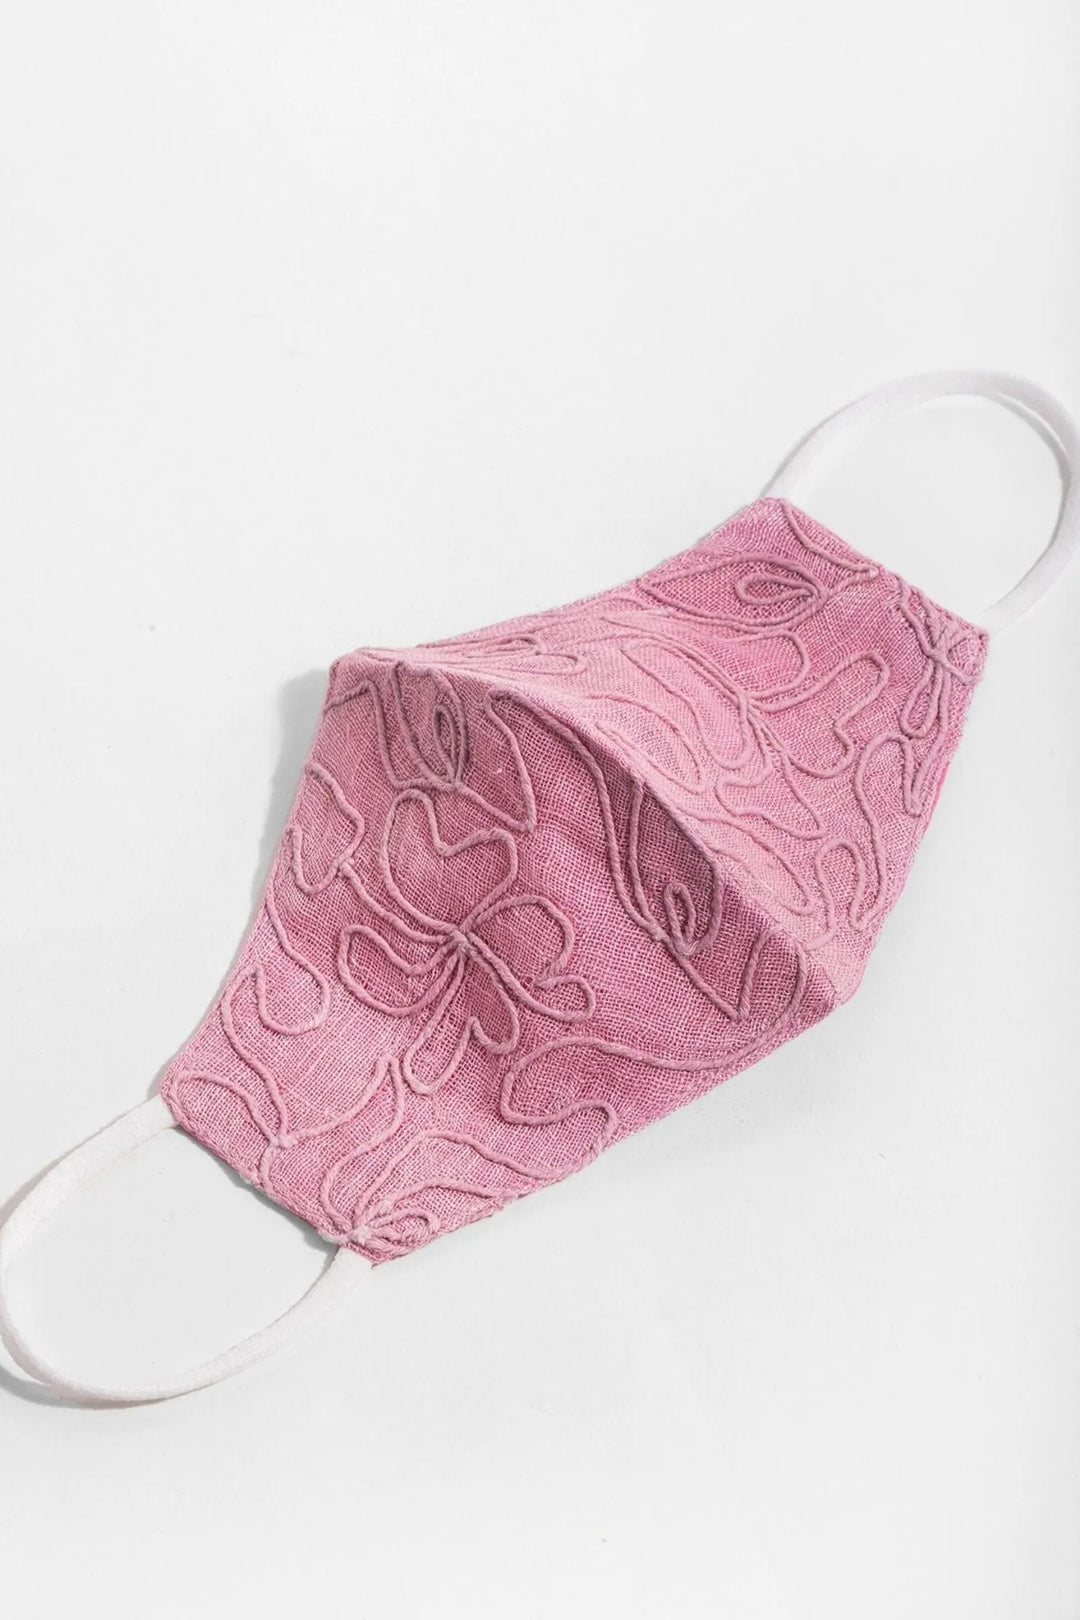 Linen Embroidered Mask Pink